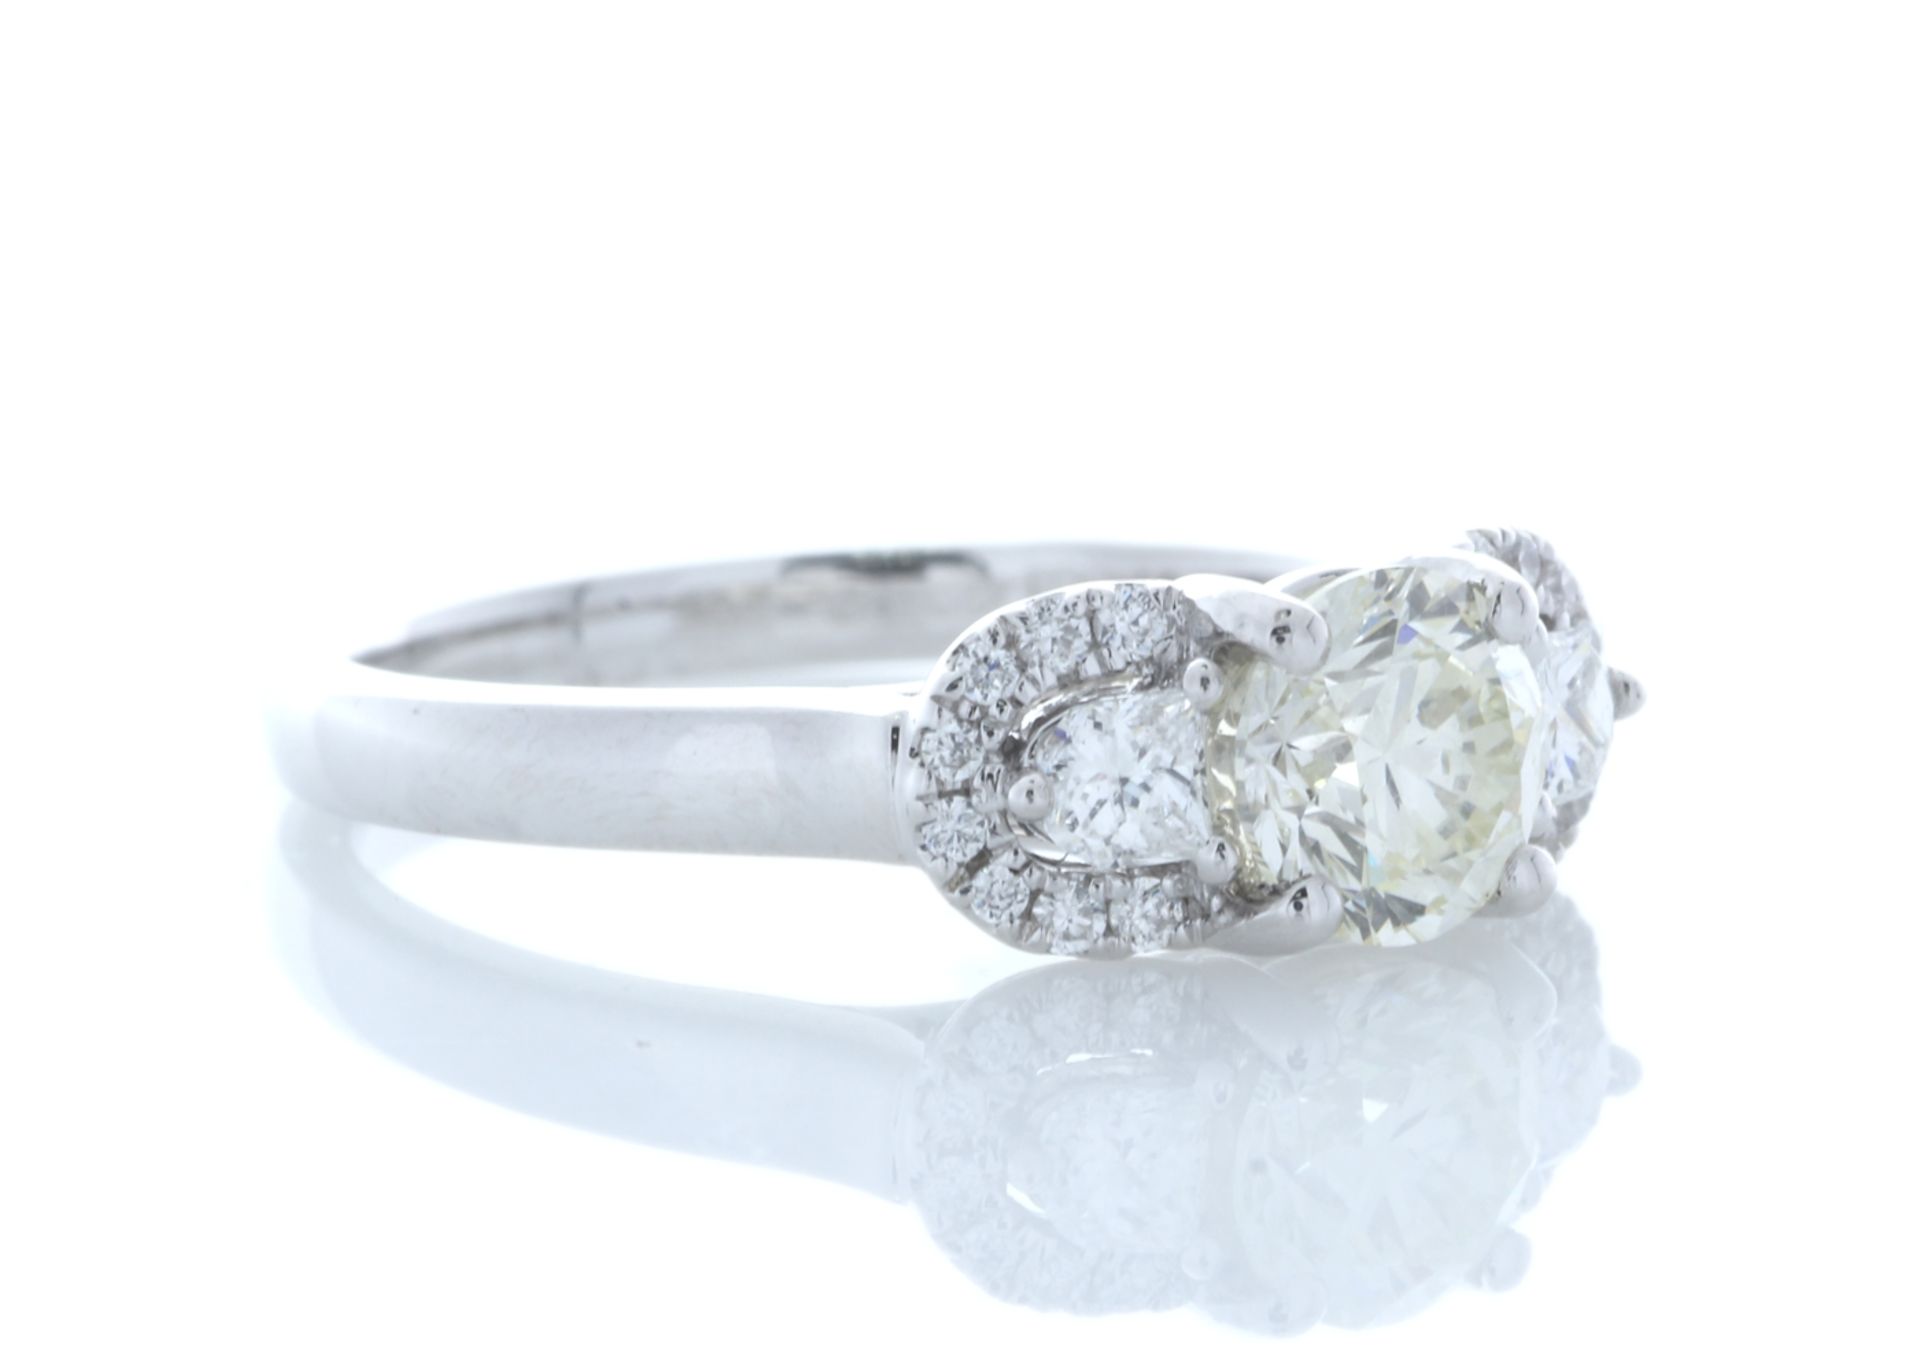 18ct White Gold Three Stone Claw Set Diamond Ring (0.75) 1.02 Carats - Valued By IDI £17,425.00 - - Image 4 of 5